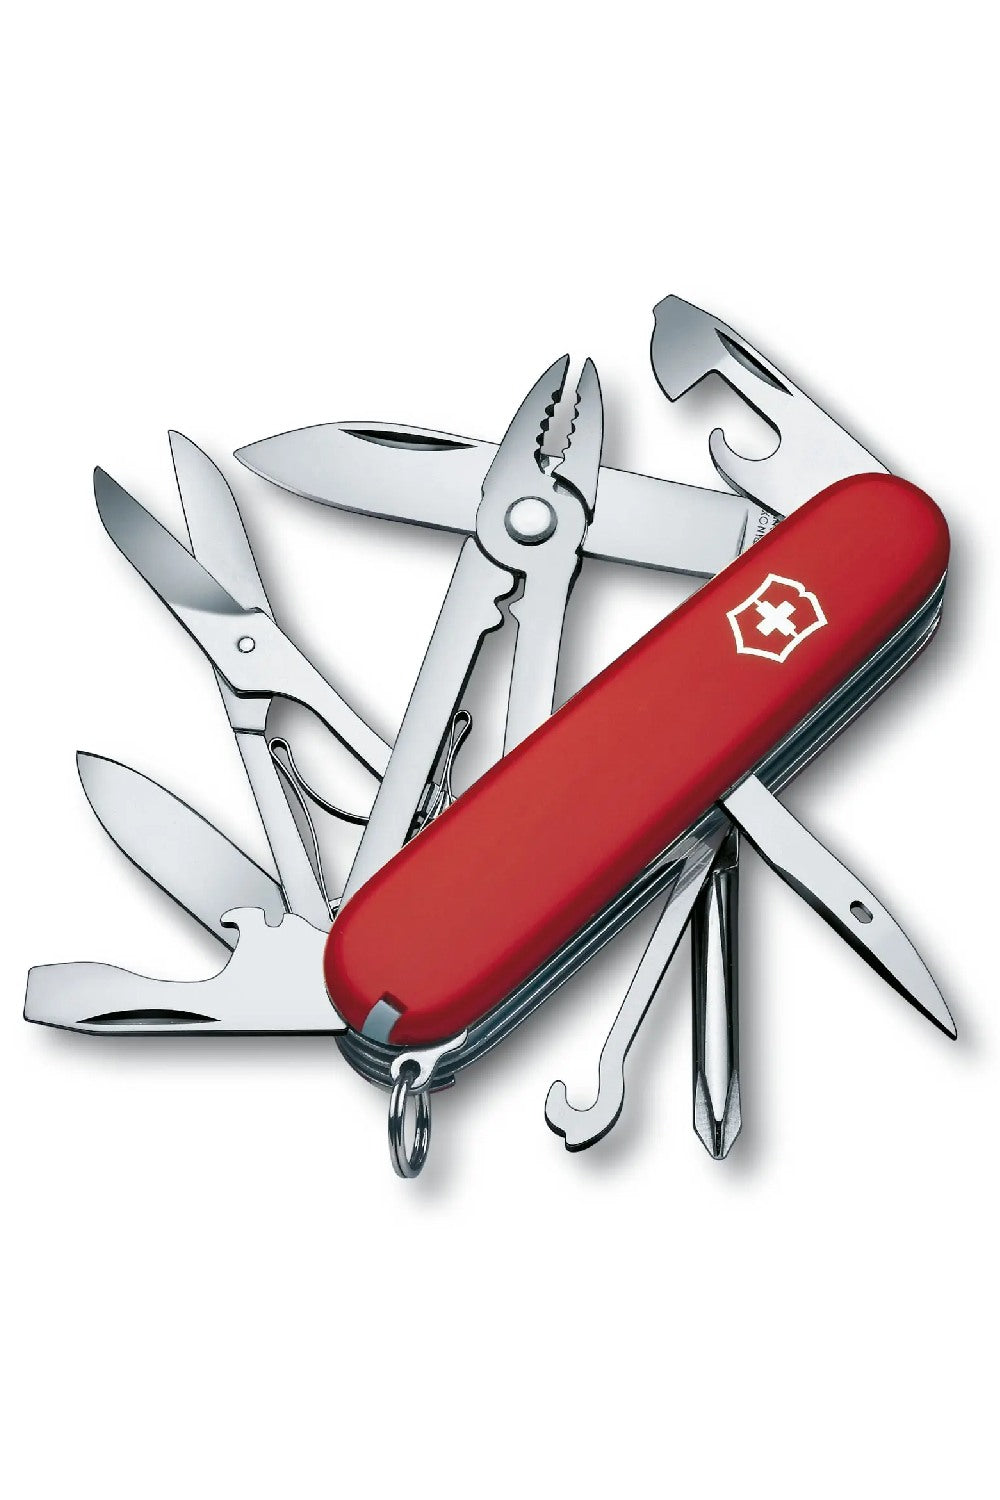 Victorinox Deluxe Tinker Swiss Army Medium Pocket Knife with Combi-Pliers in Red